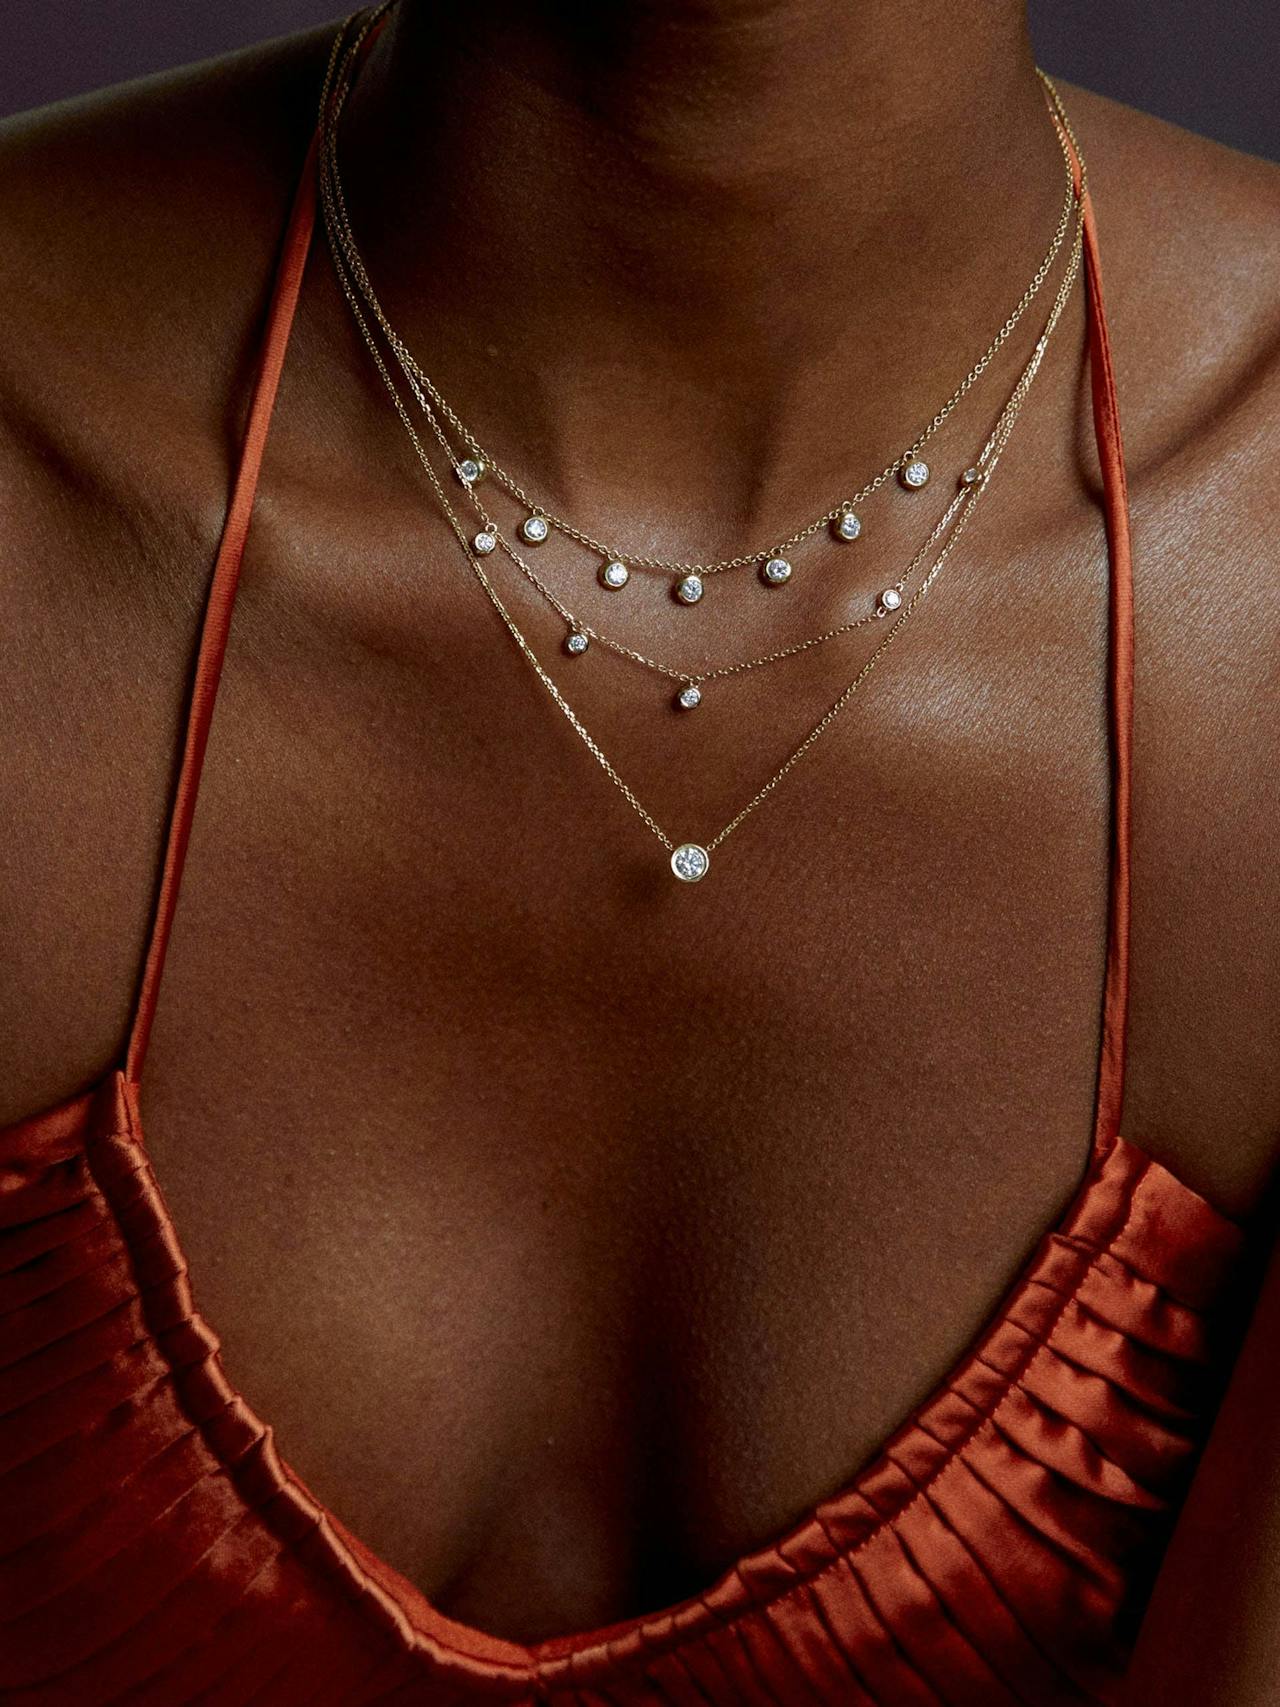 Your new everyday staple you won’t want to live without. The Cosmo necklace features 7 bezel diamonds of 0.10ct each to perfectly dress up any outfit.